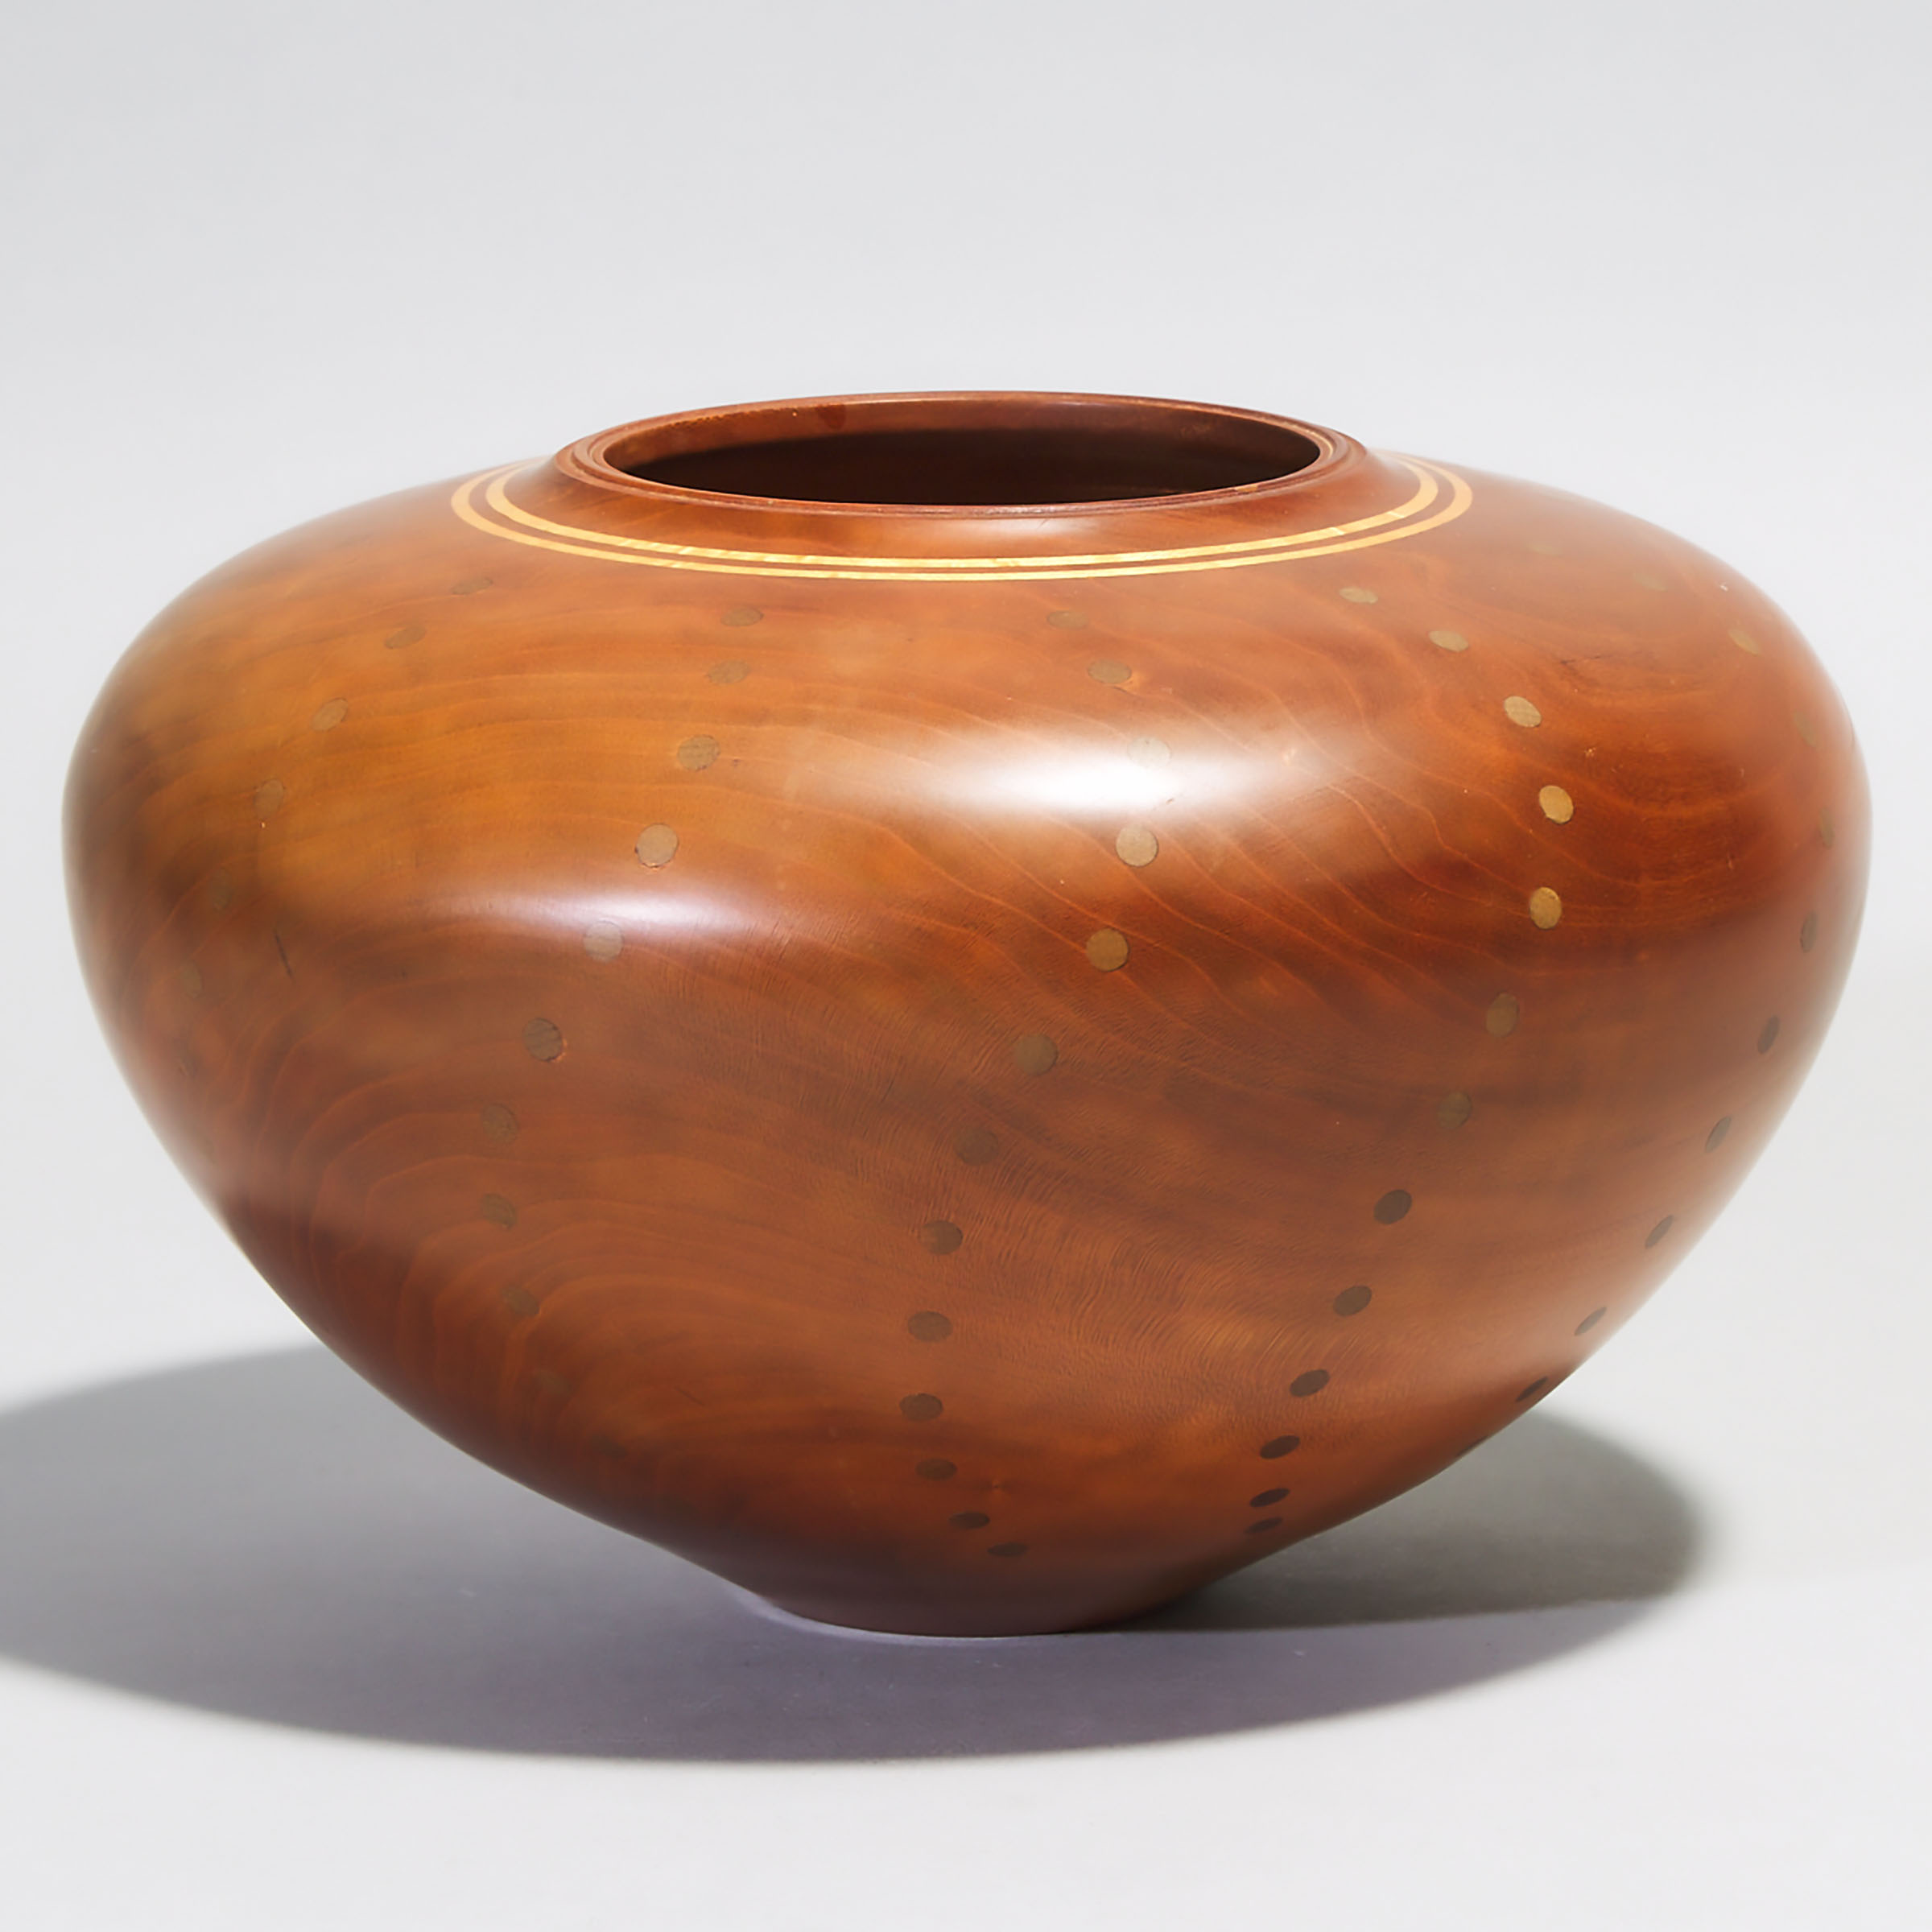 Robert G. Woods (Canadian, fl. late 20th century), Turned and Inlaid Cherry Wood Vase, 1991